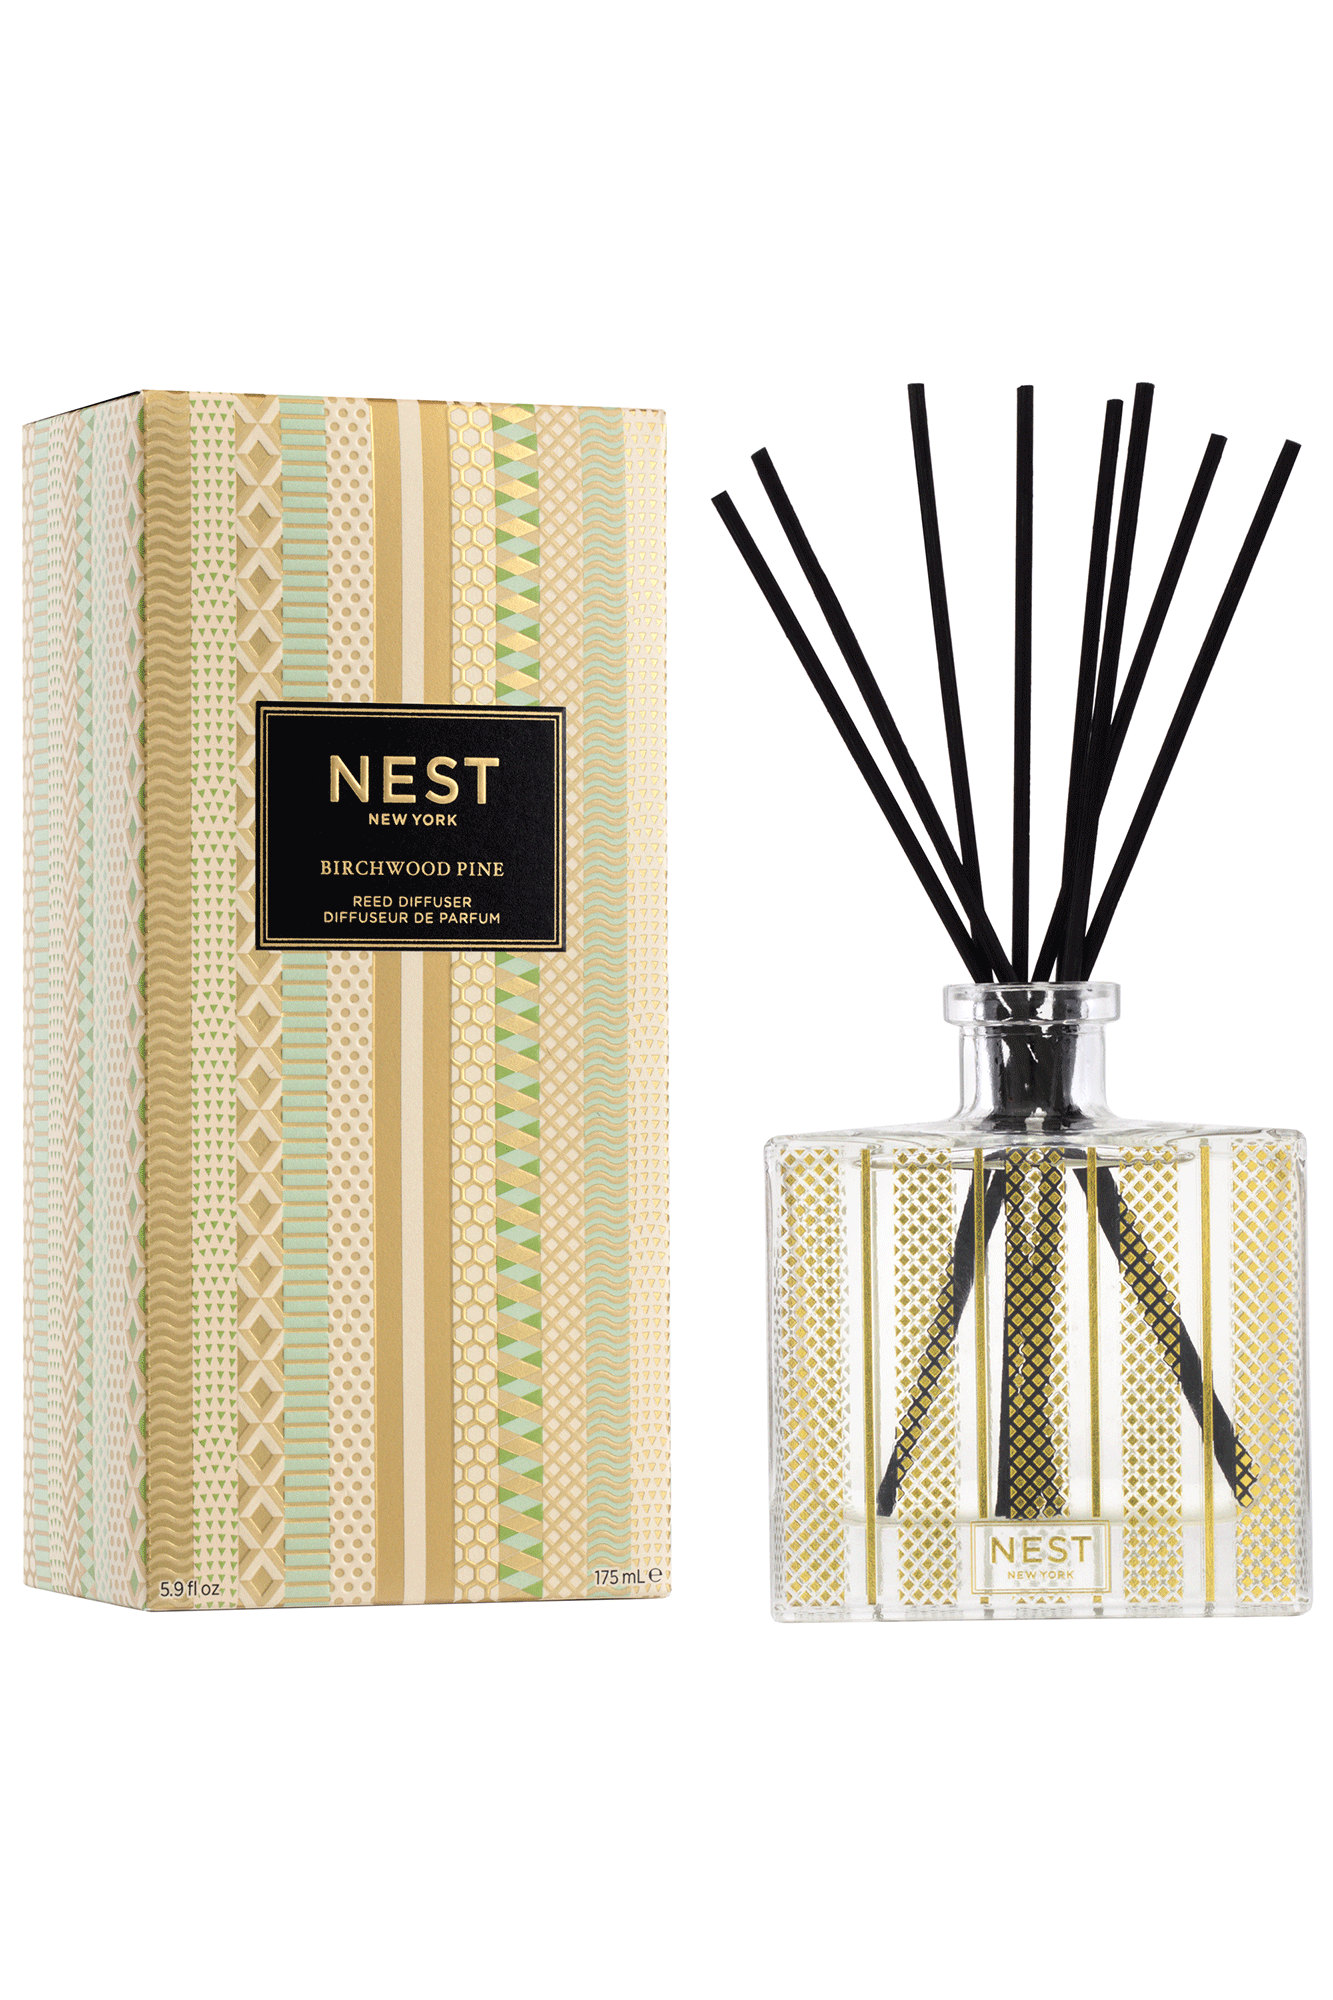 Bring the fresh scent of a winter forest into your home with our Birchwood & Pine Reed Diffuser from Nest. This bestselling fragrance is crafted from a blend of white pine, fir balsam, and birchwood, layered over a warm base of amber and musk. Refresh your home and relax in the inviting aroma of nature.